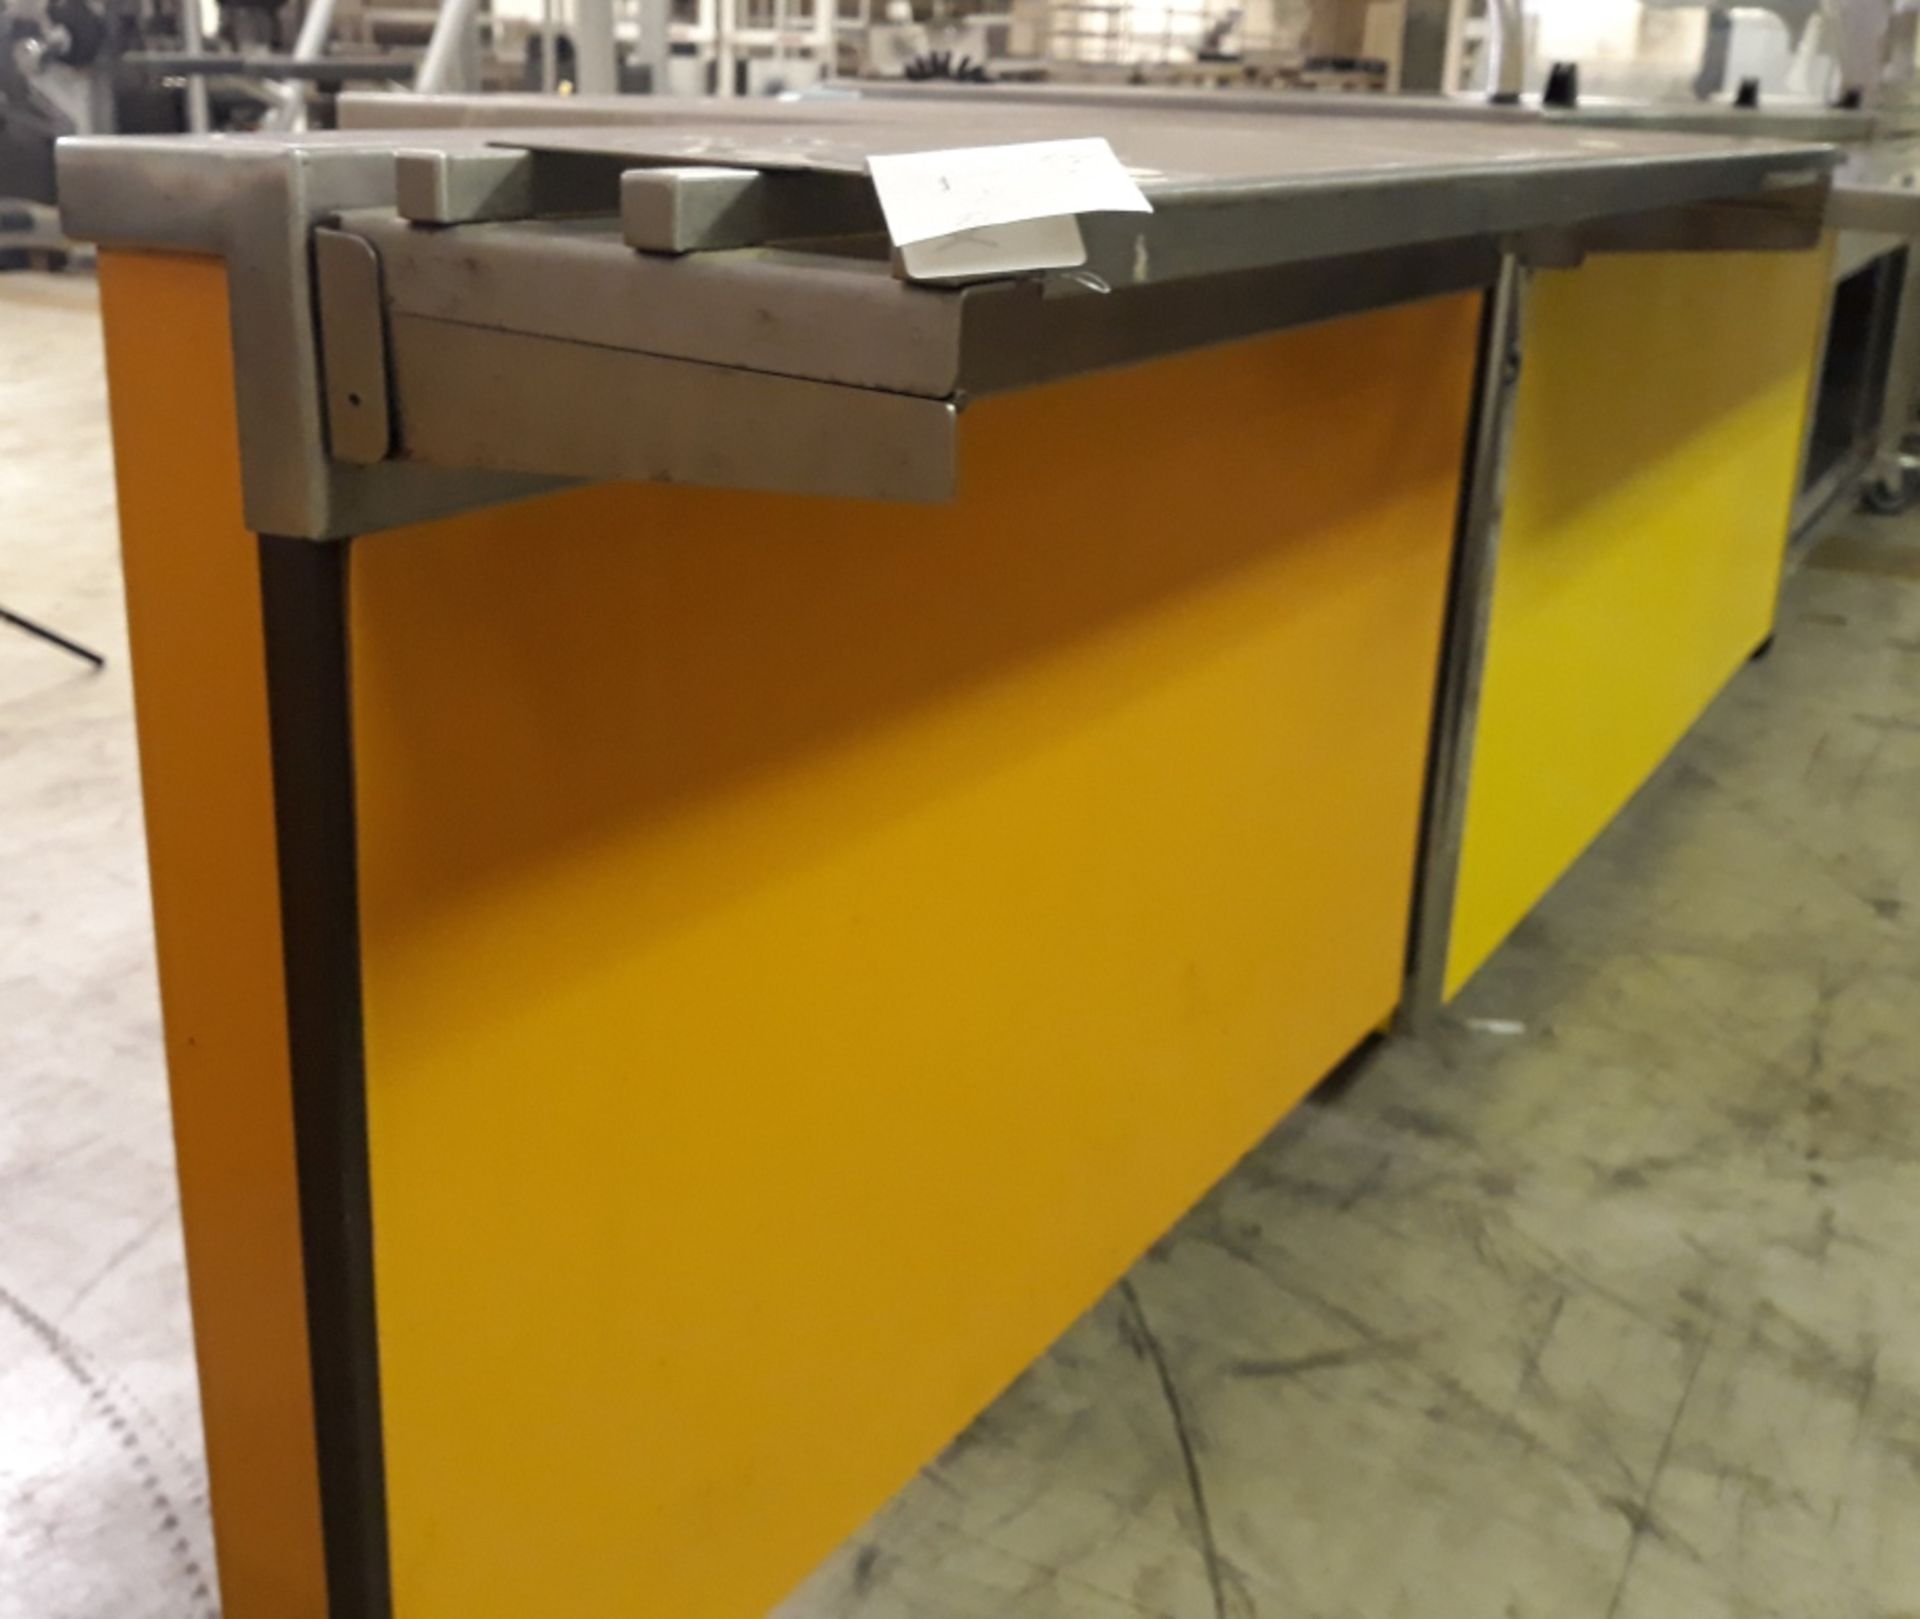 Moffat stainless steel till counter. - Image 3 of 3